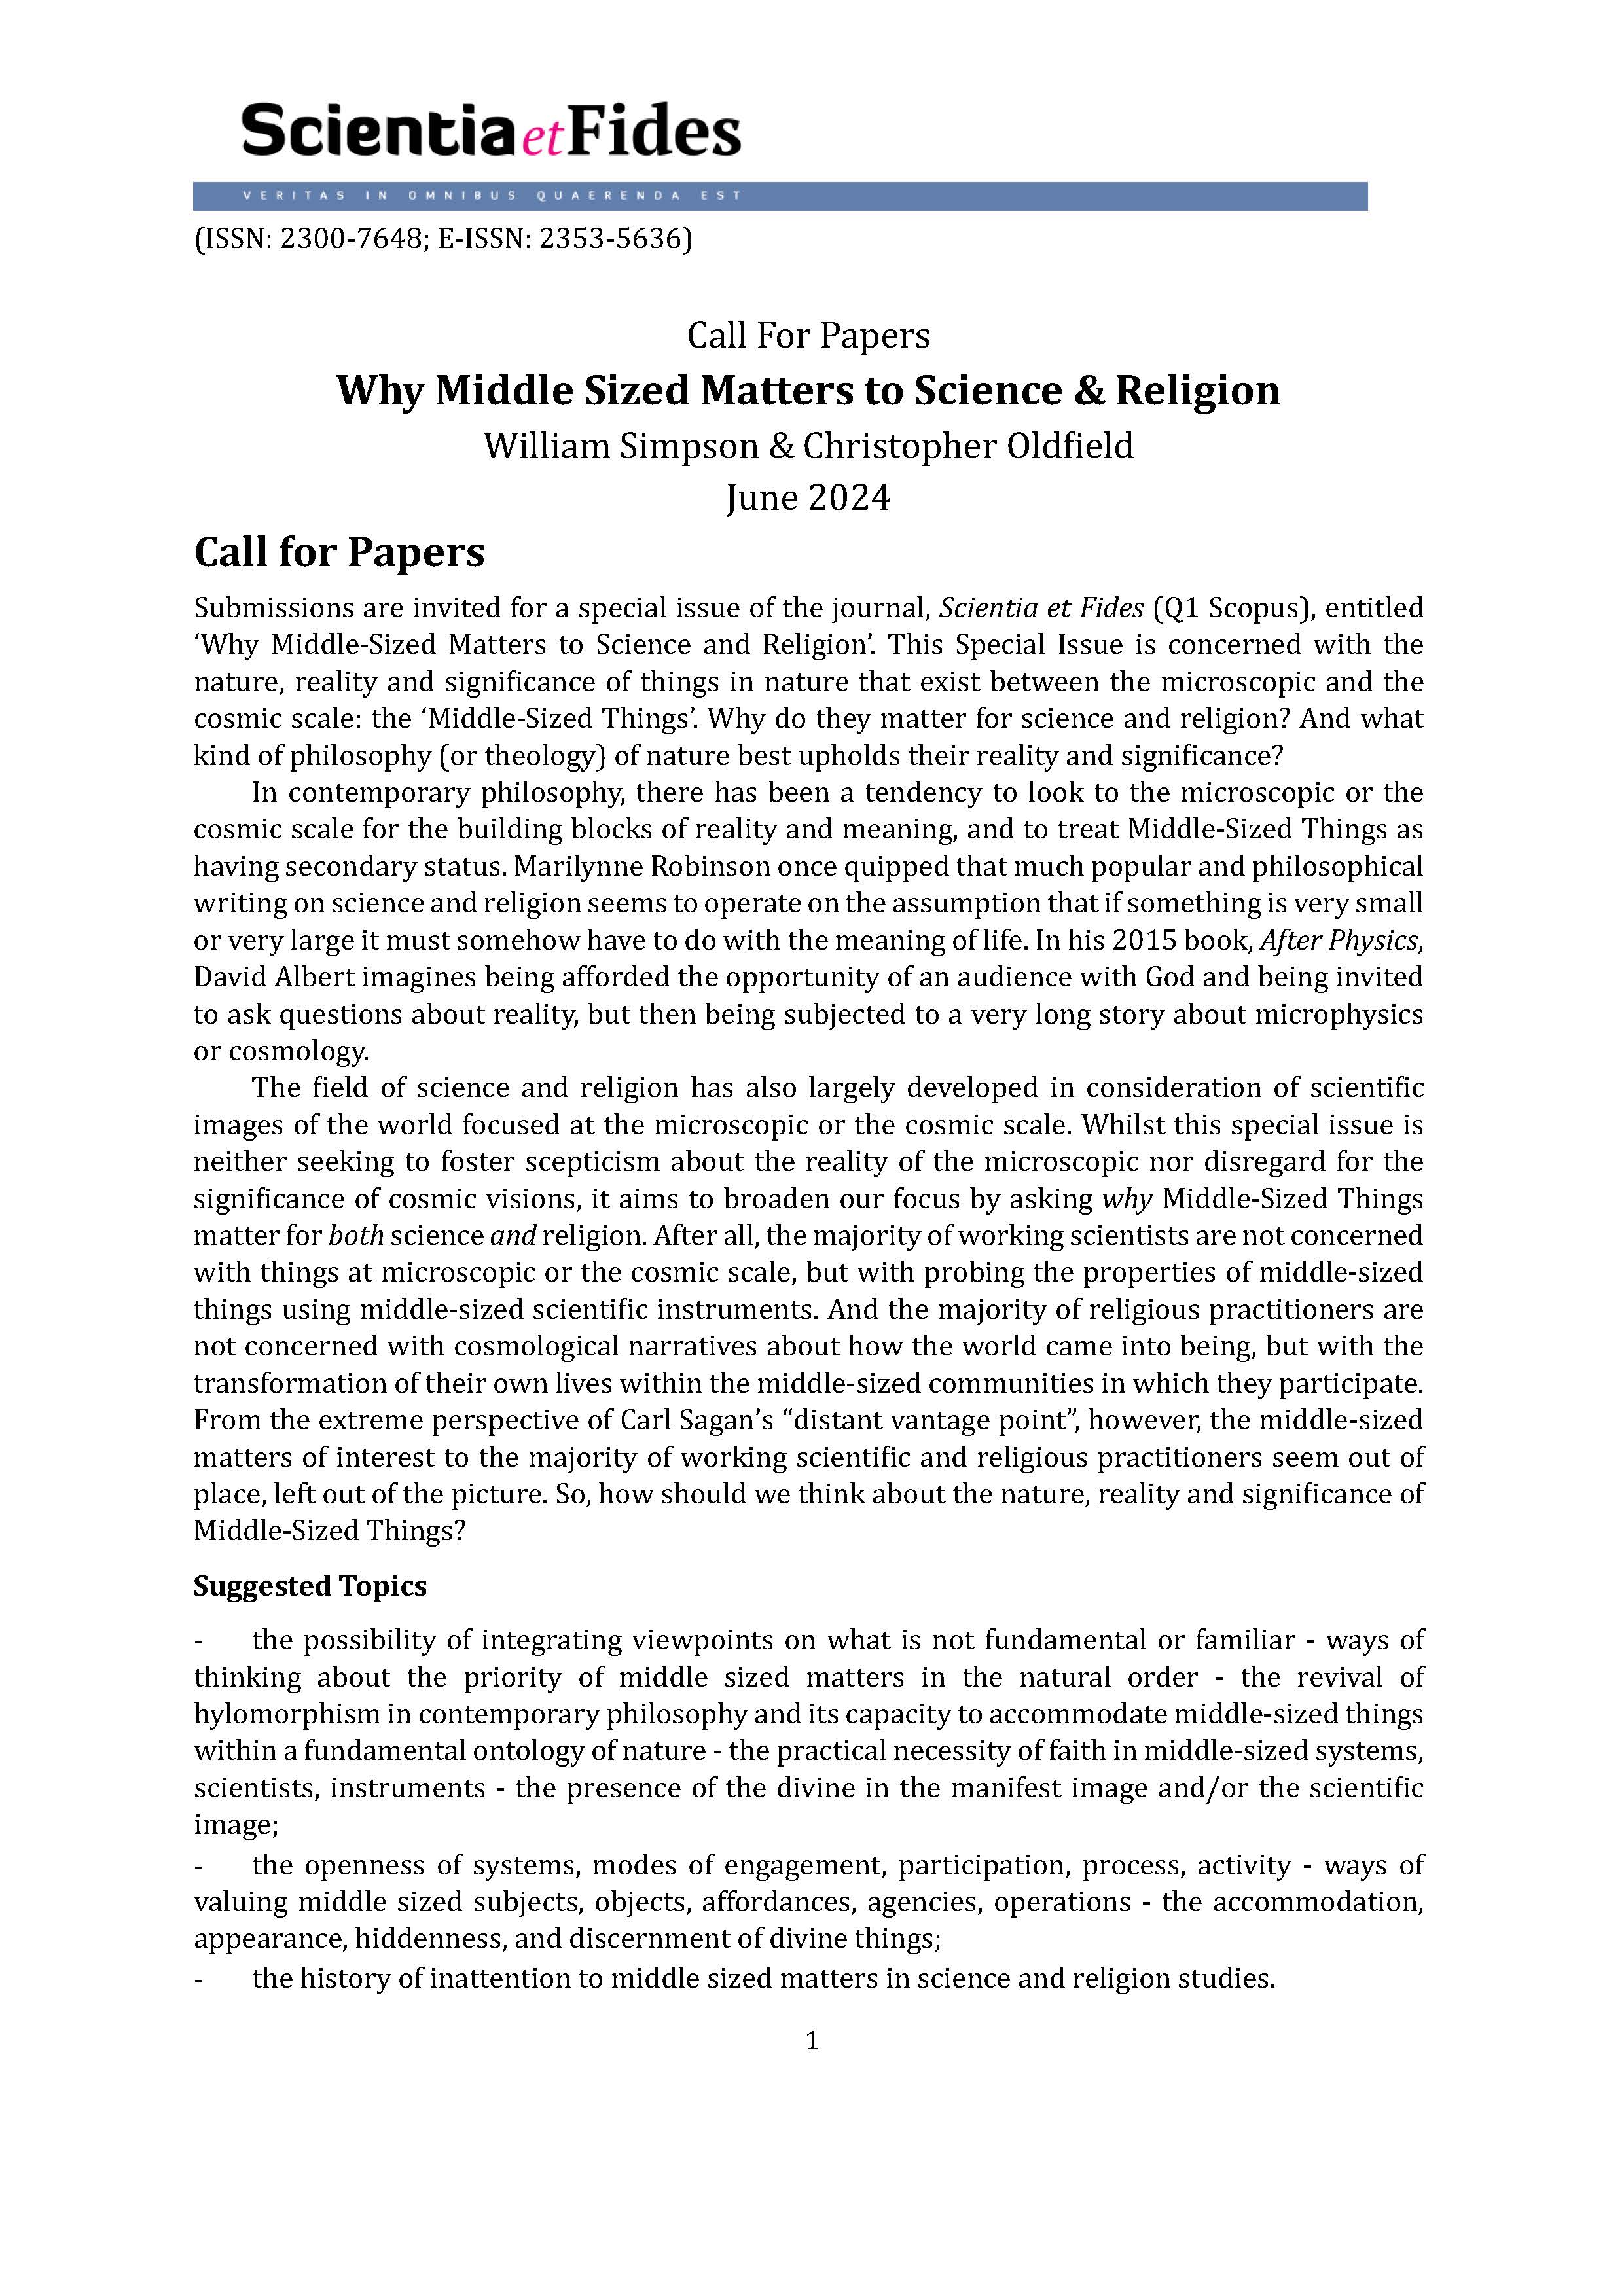 						Cover Image Call For Papers: Why Middle Sized Matters to Science & Religion
					